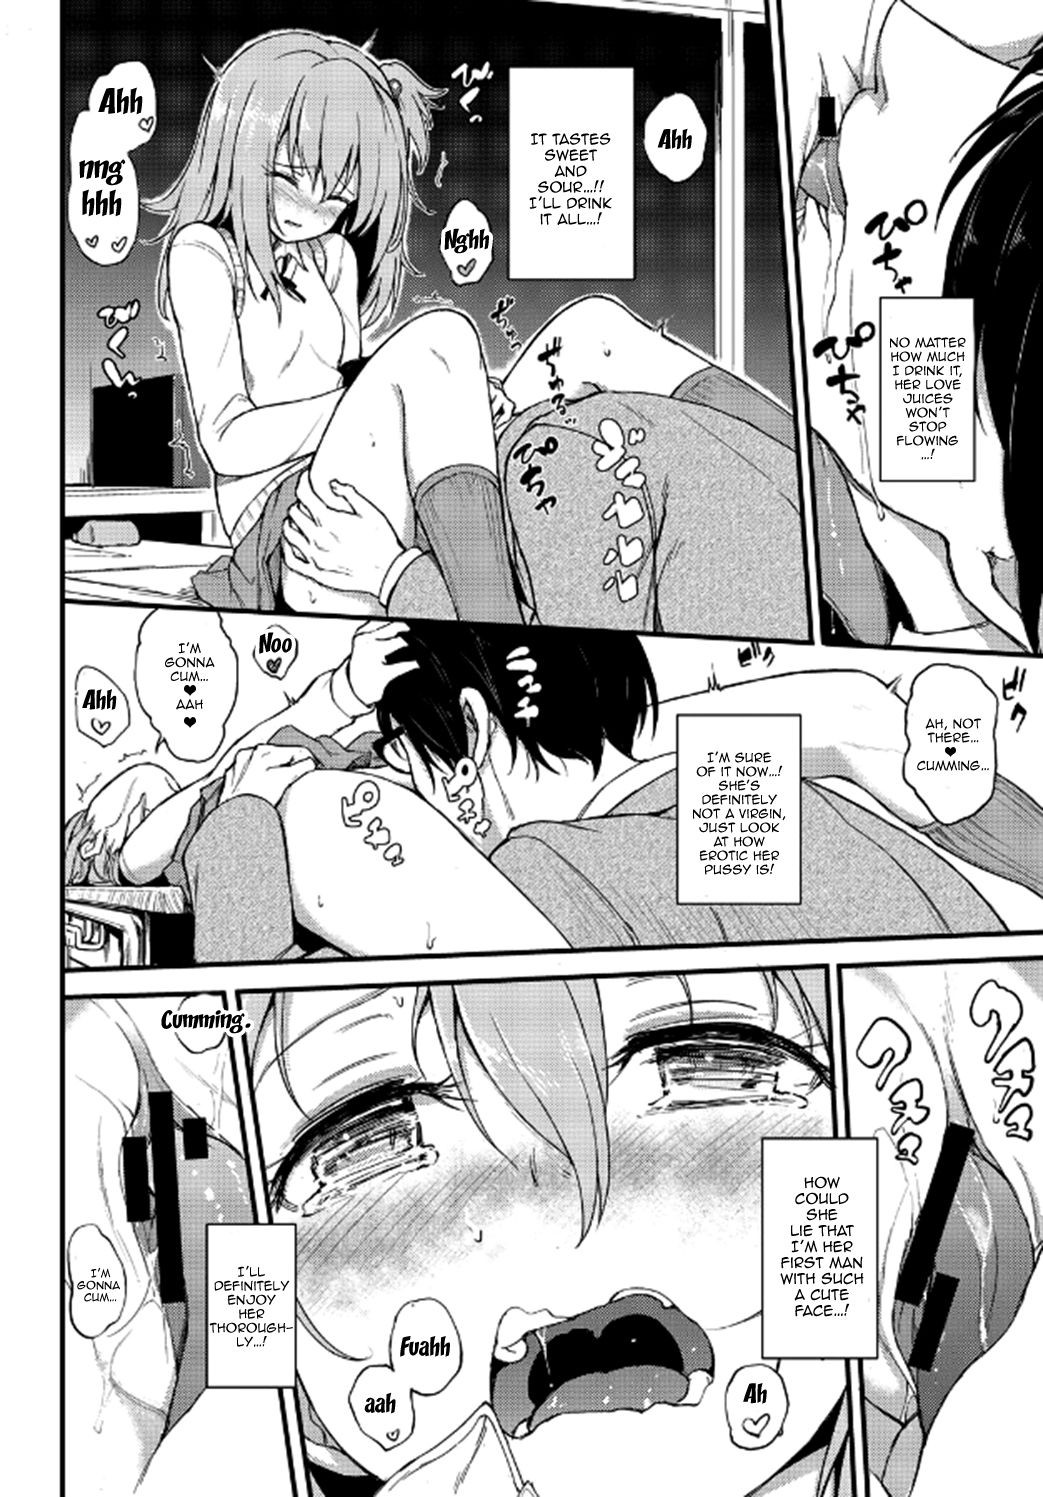 Lovely Aina-chan - Chapter 1 porn comic picture 14